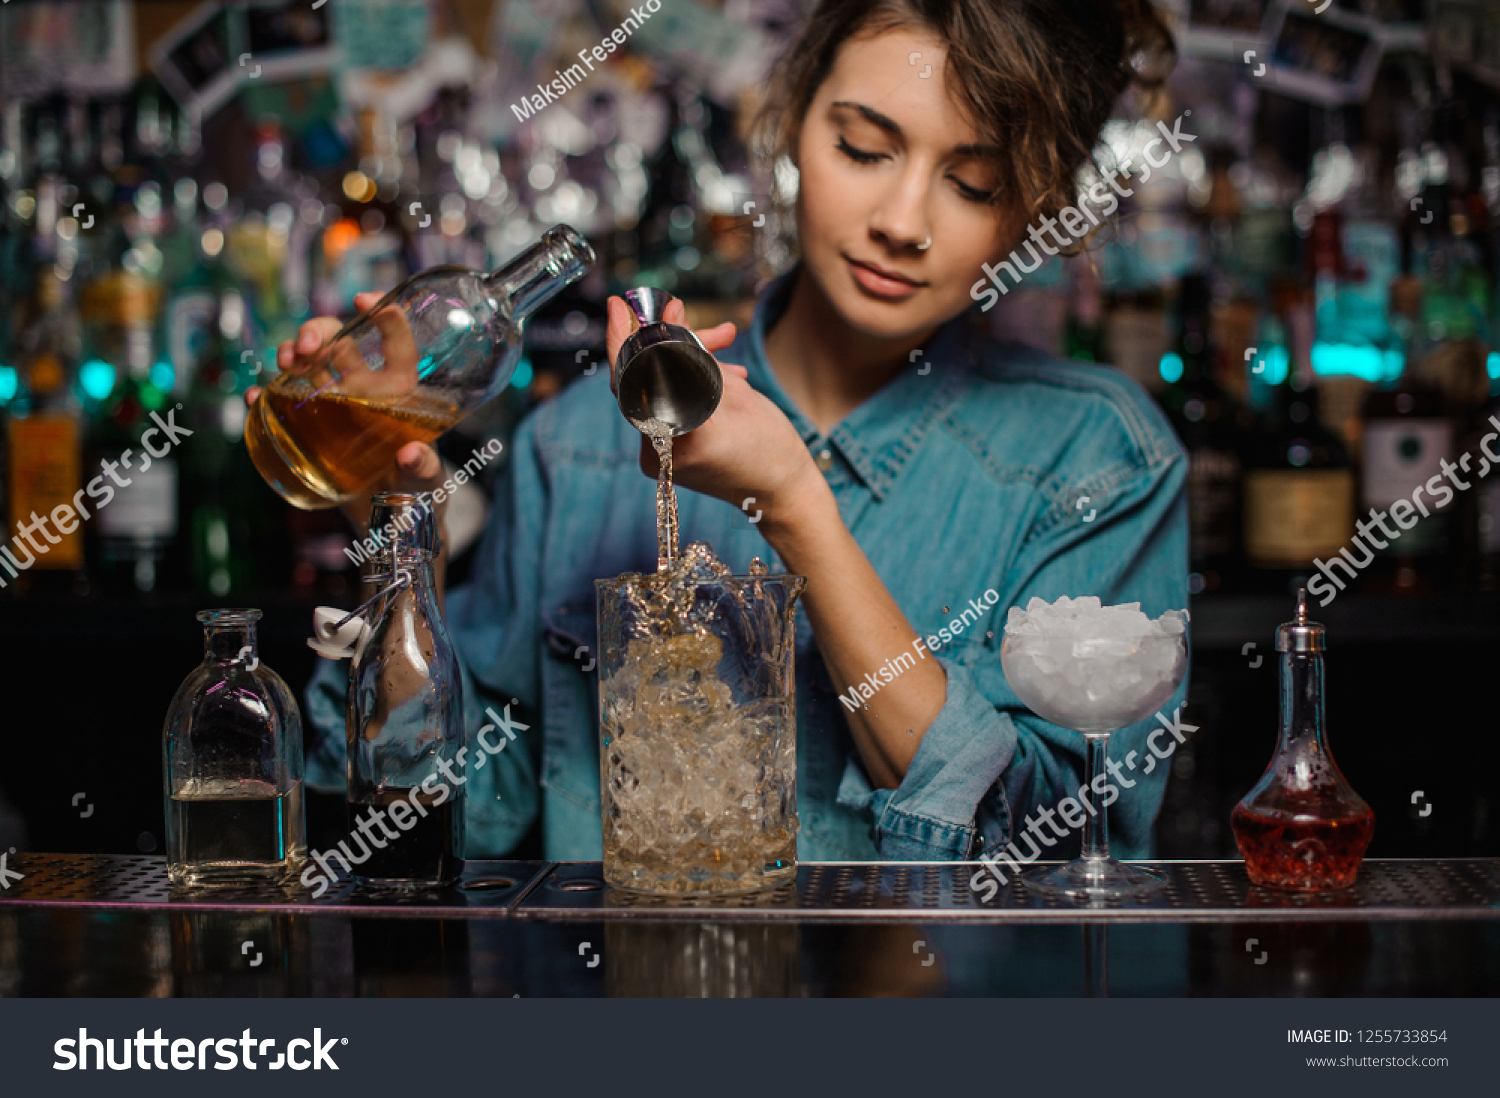 Female bartender pouring to the measuring glass cup with ice cubes an alcoholic drink from steel jigger on the bar counter on the blurred background #1255733854